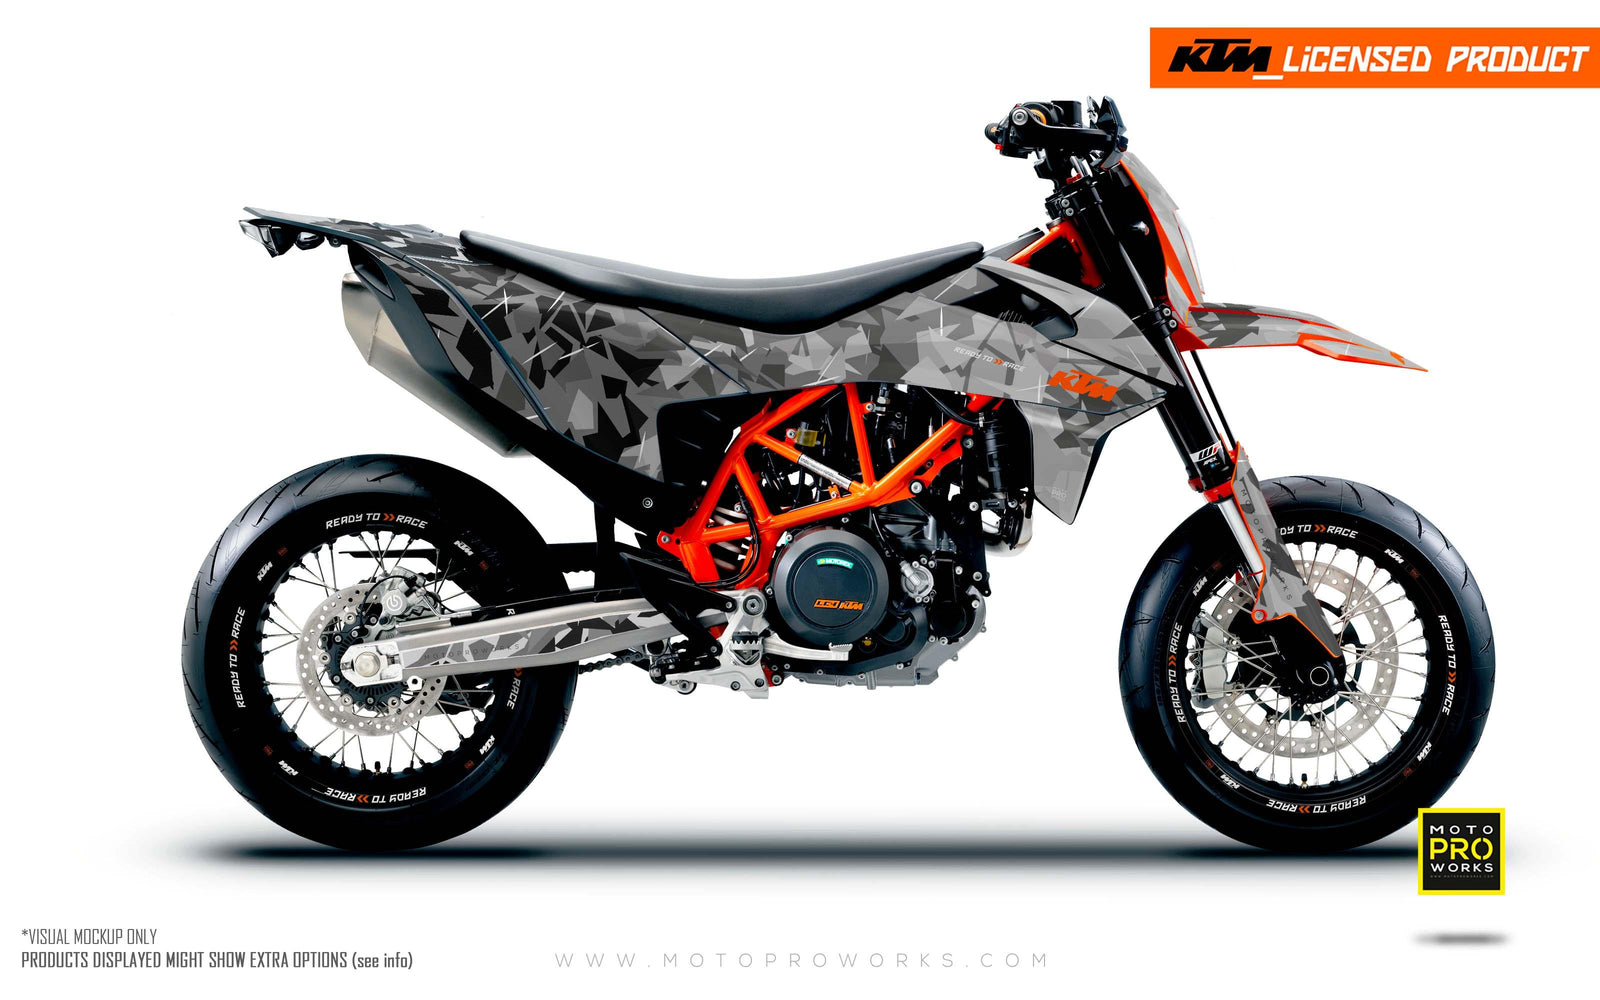 Flake - MotoProWorks  Decals and Bike Graphic kit